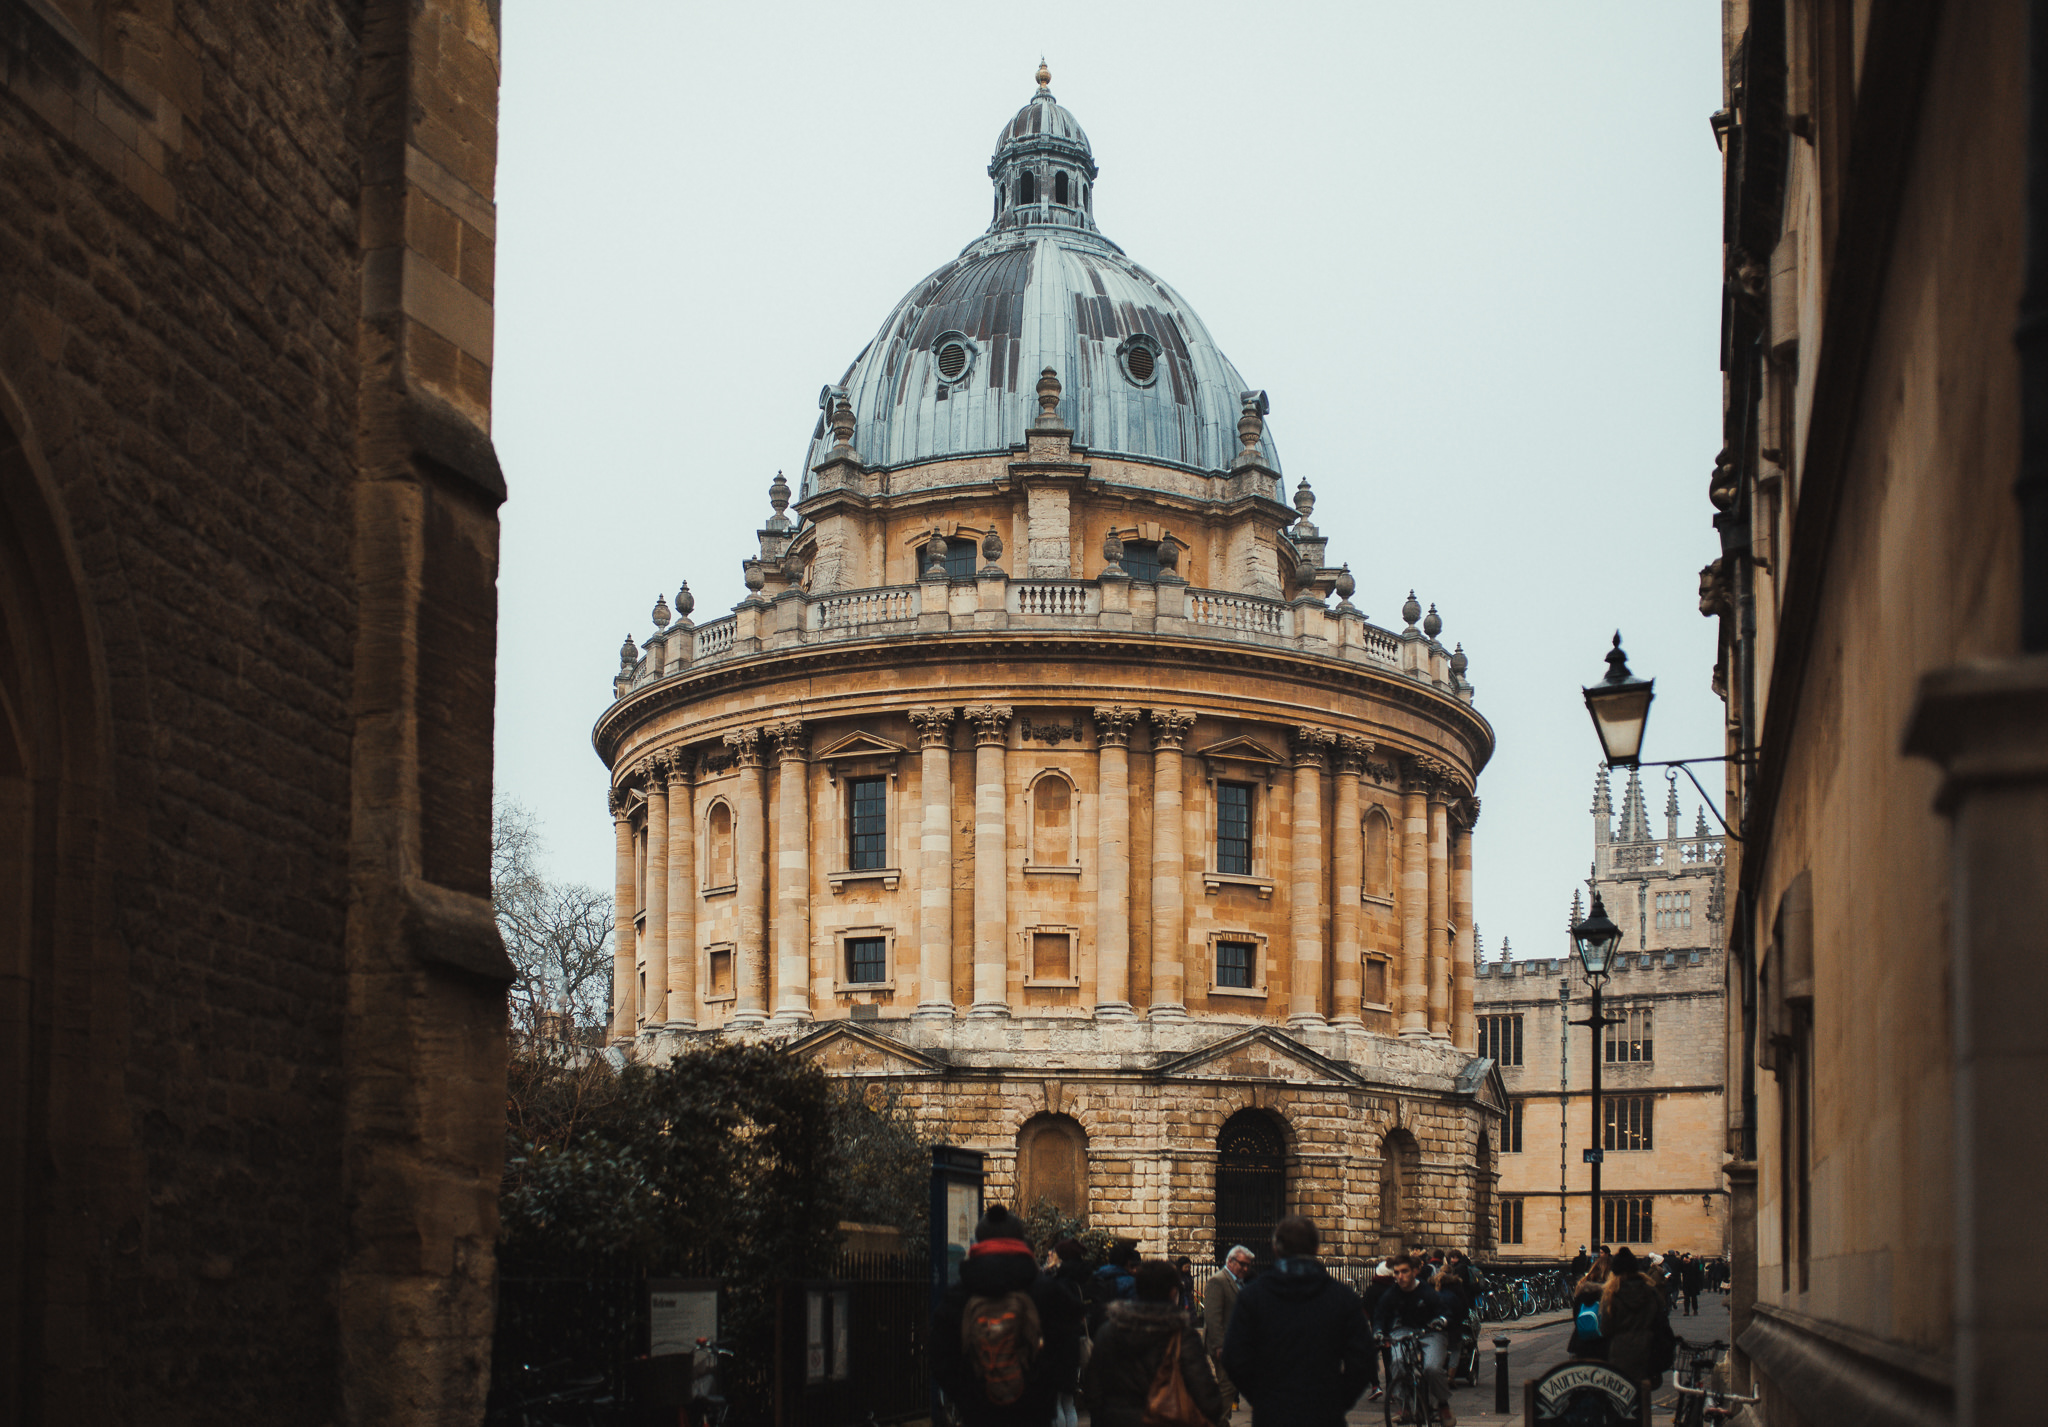   Radcliffe Camera, the science library  